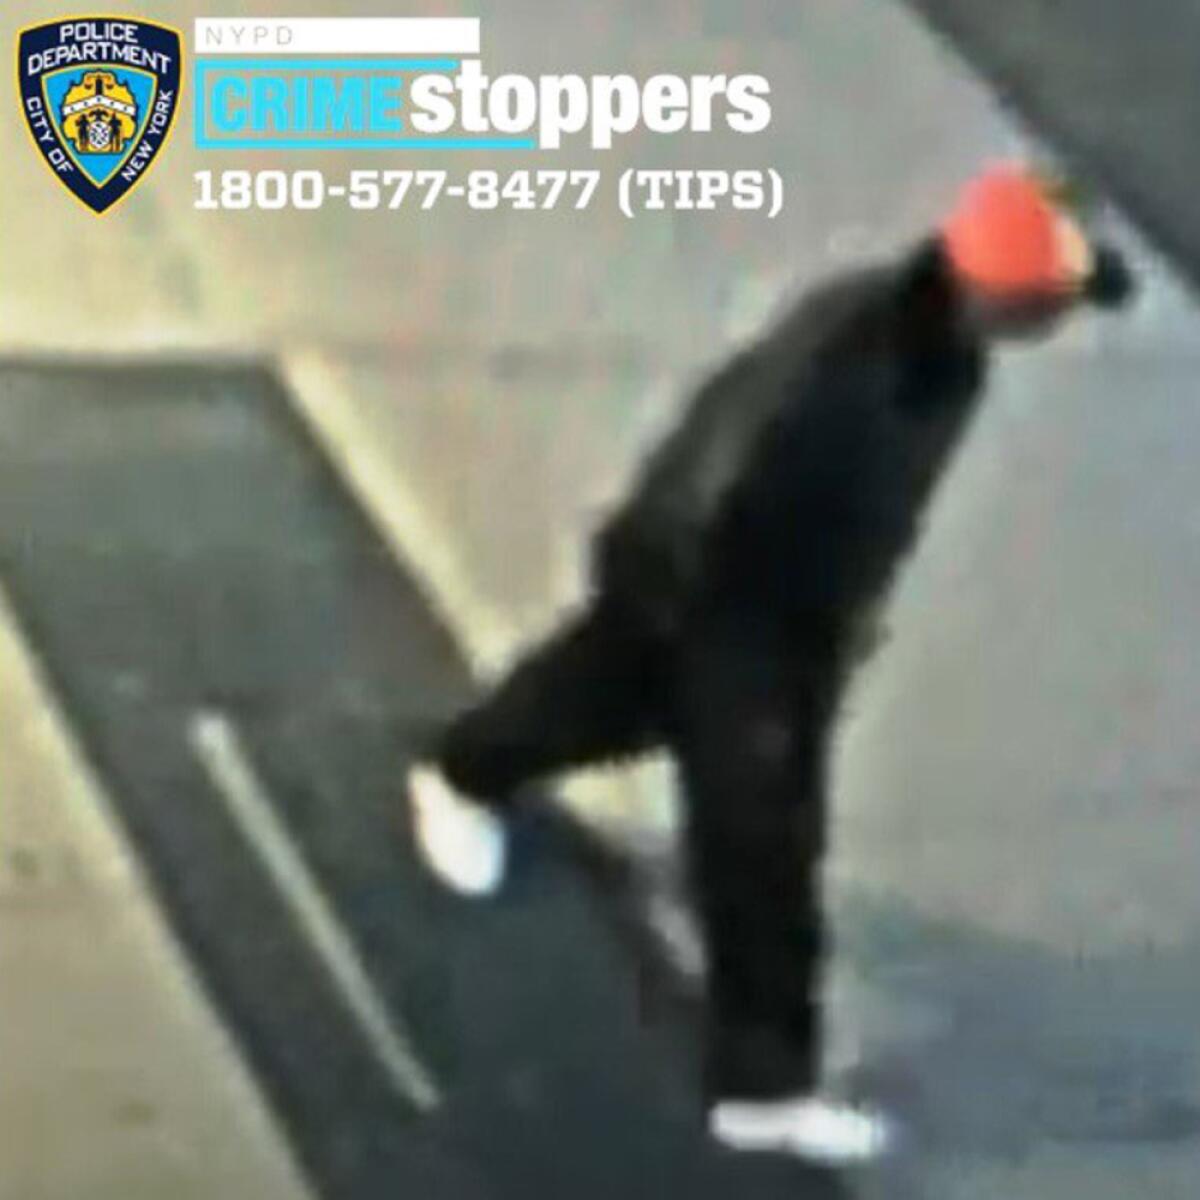 Image of suspected attacker from surveillance video